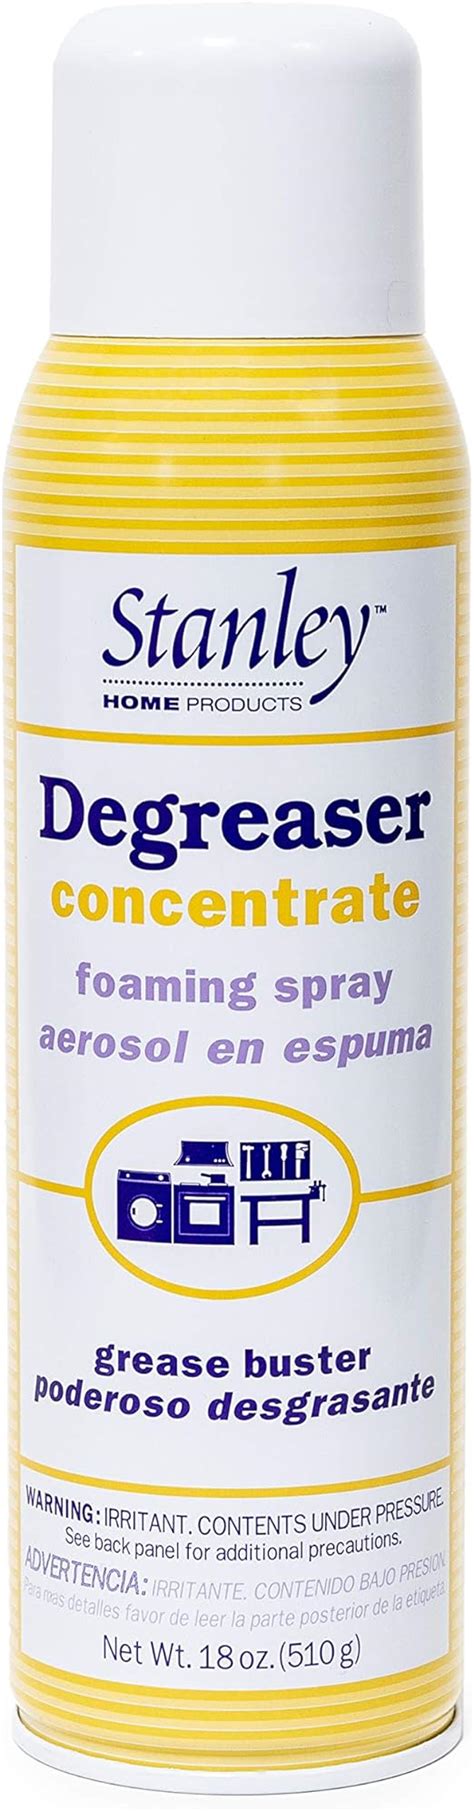 Stanley Home Products Degreaser Concentrate Foaming Spray All Purpose Commercial